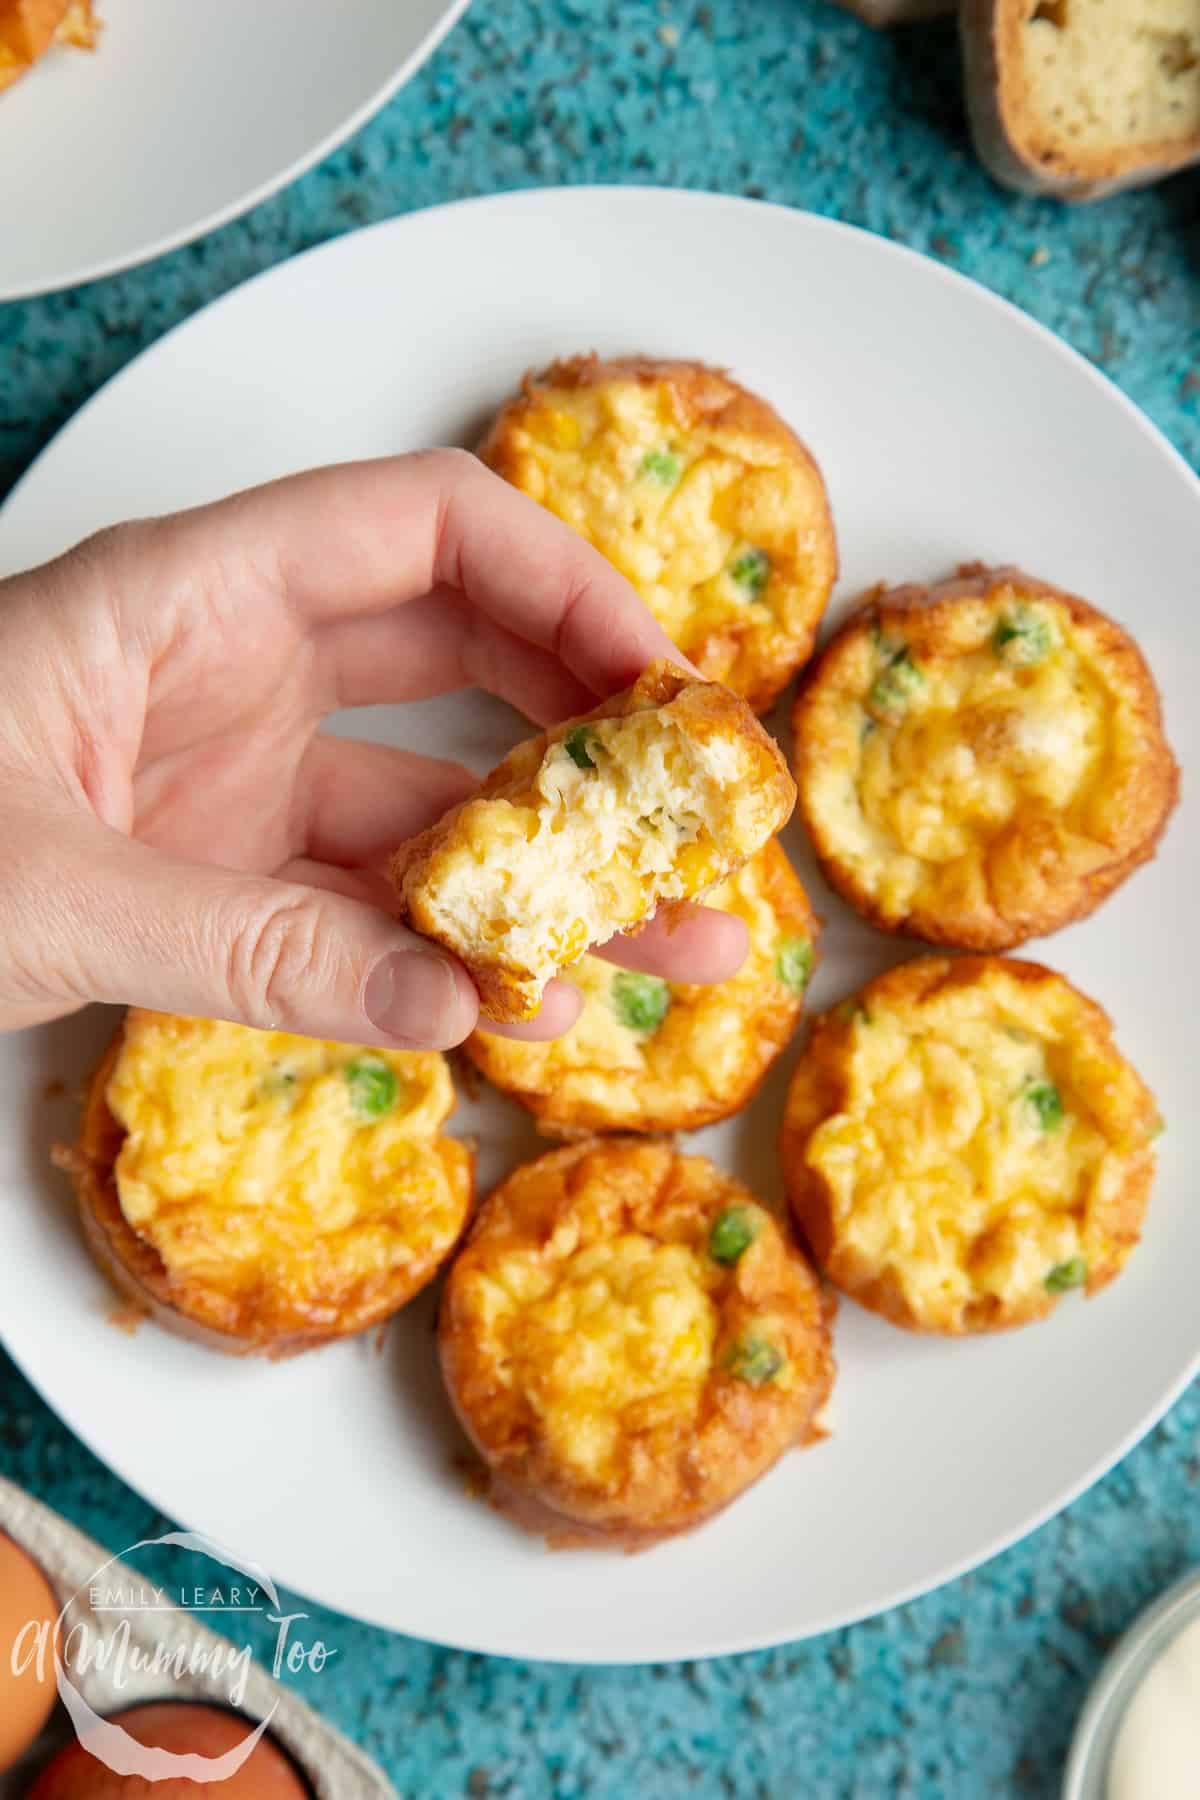 A holding a frittata, tilted to show the creamy, fluffy inner. In the background, more mini vegetable frittatas are arranged on a white plate. 